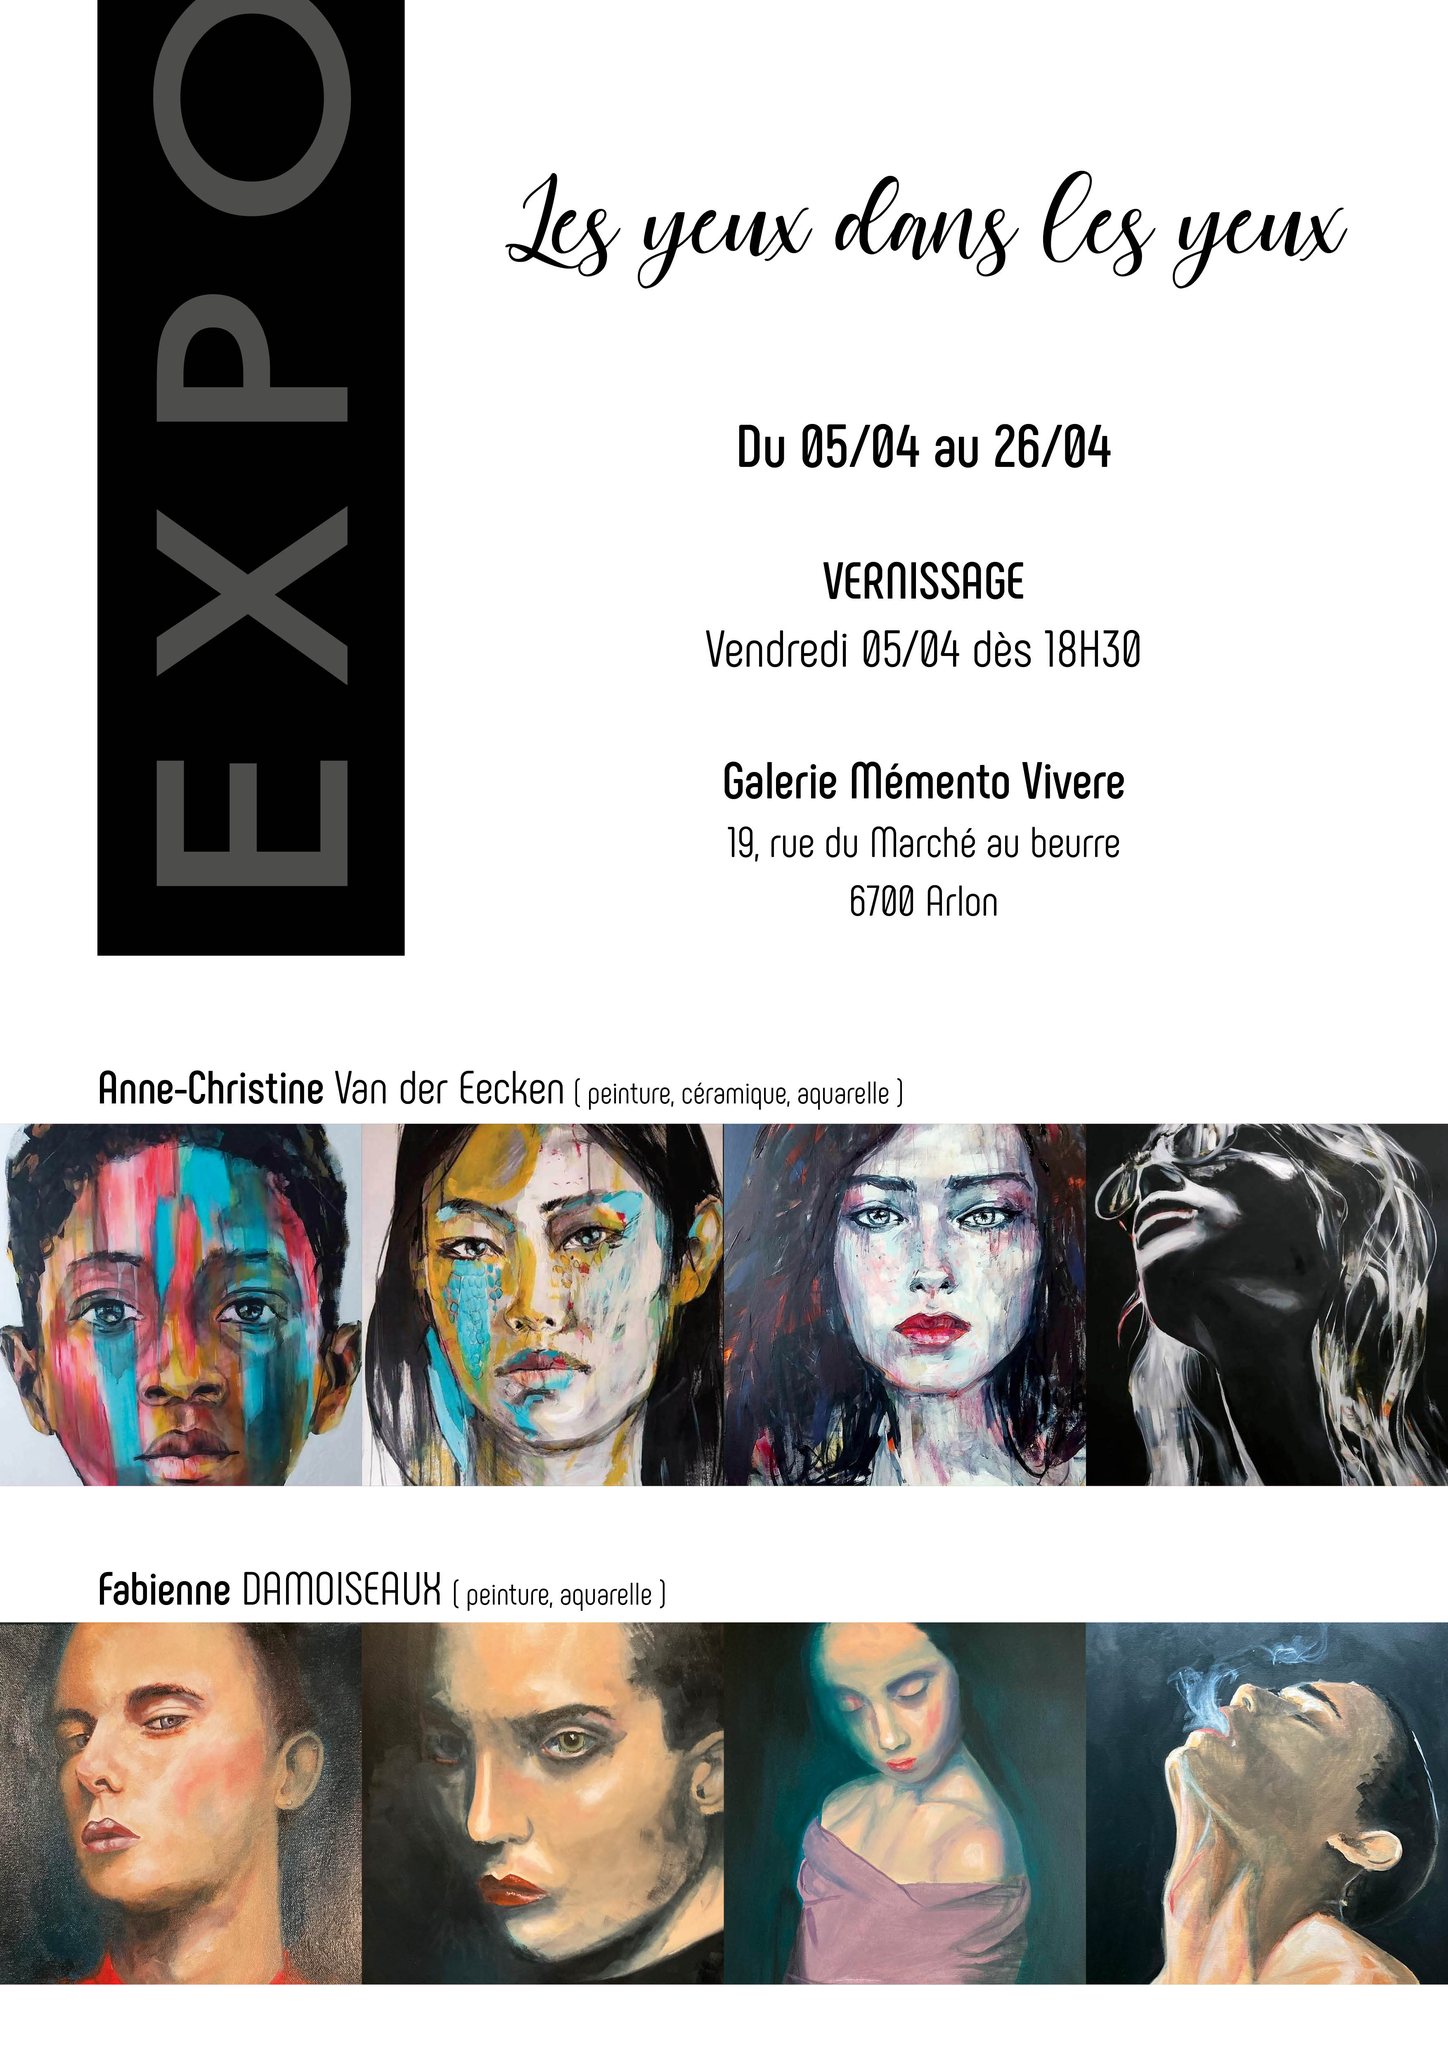 Exhibition “Eyes in the eyes”